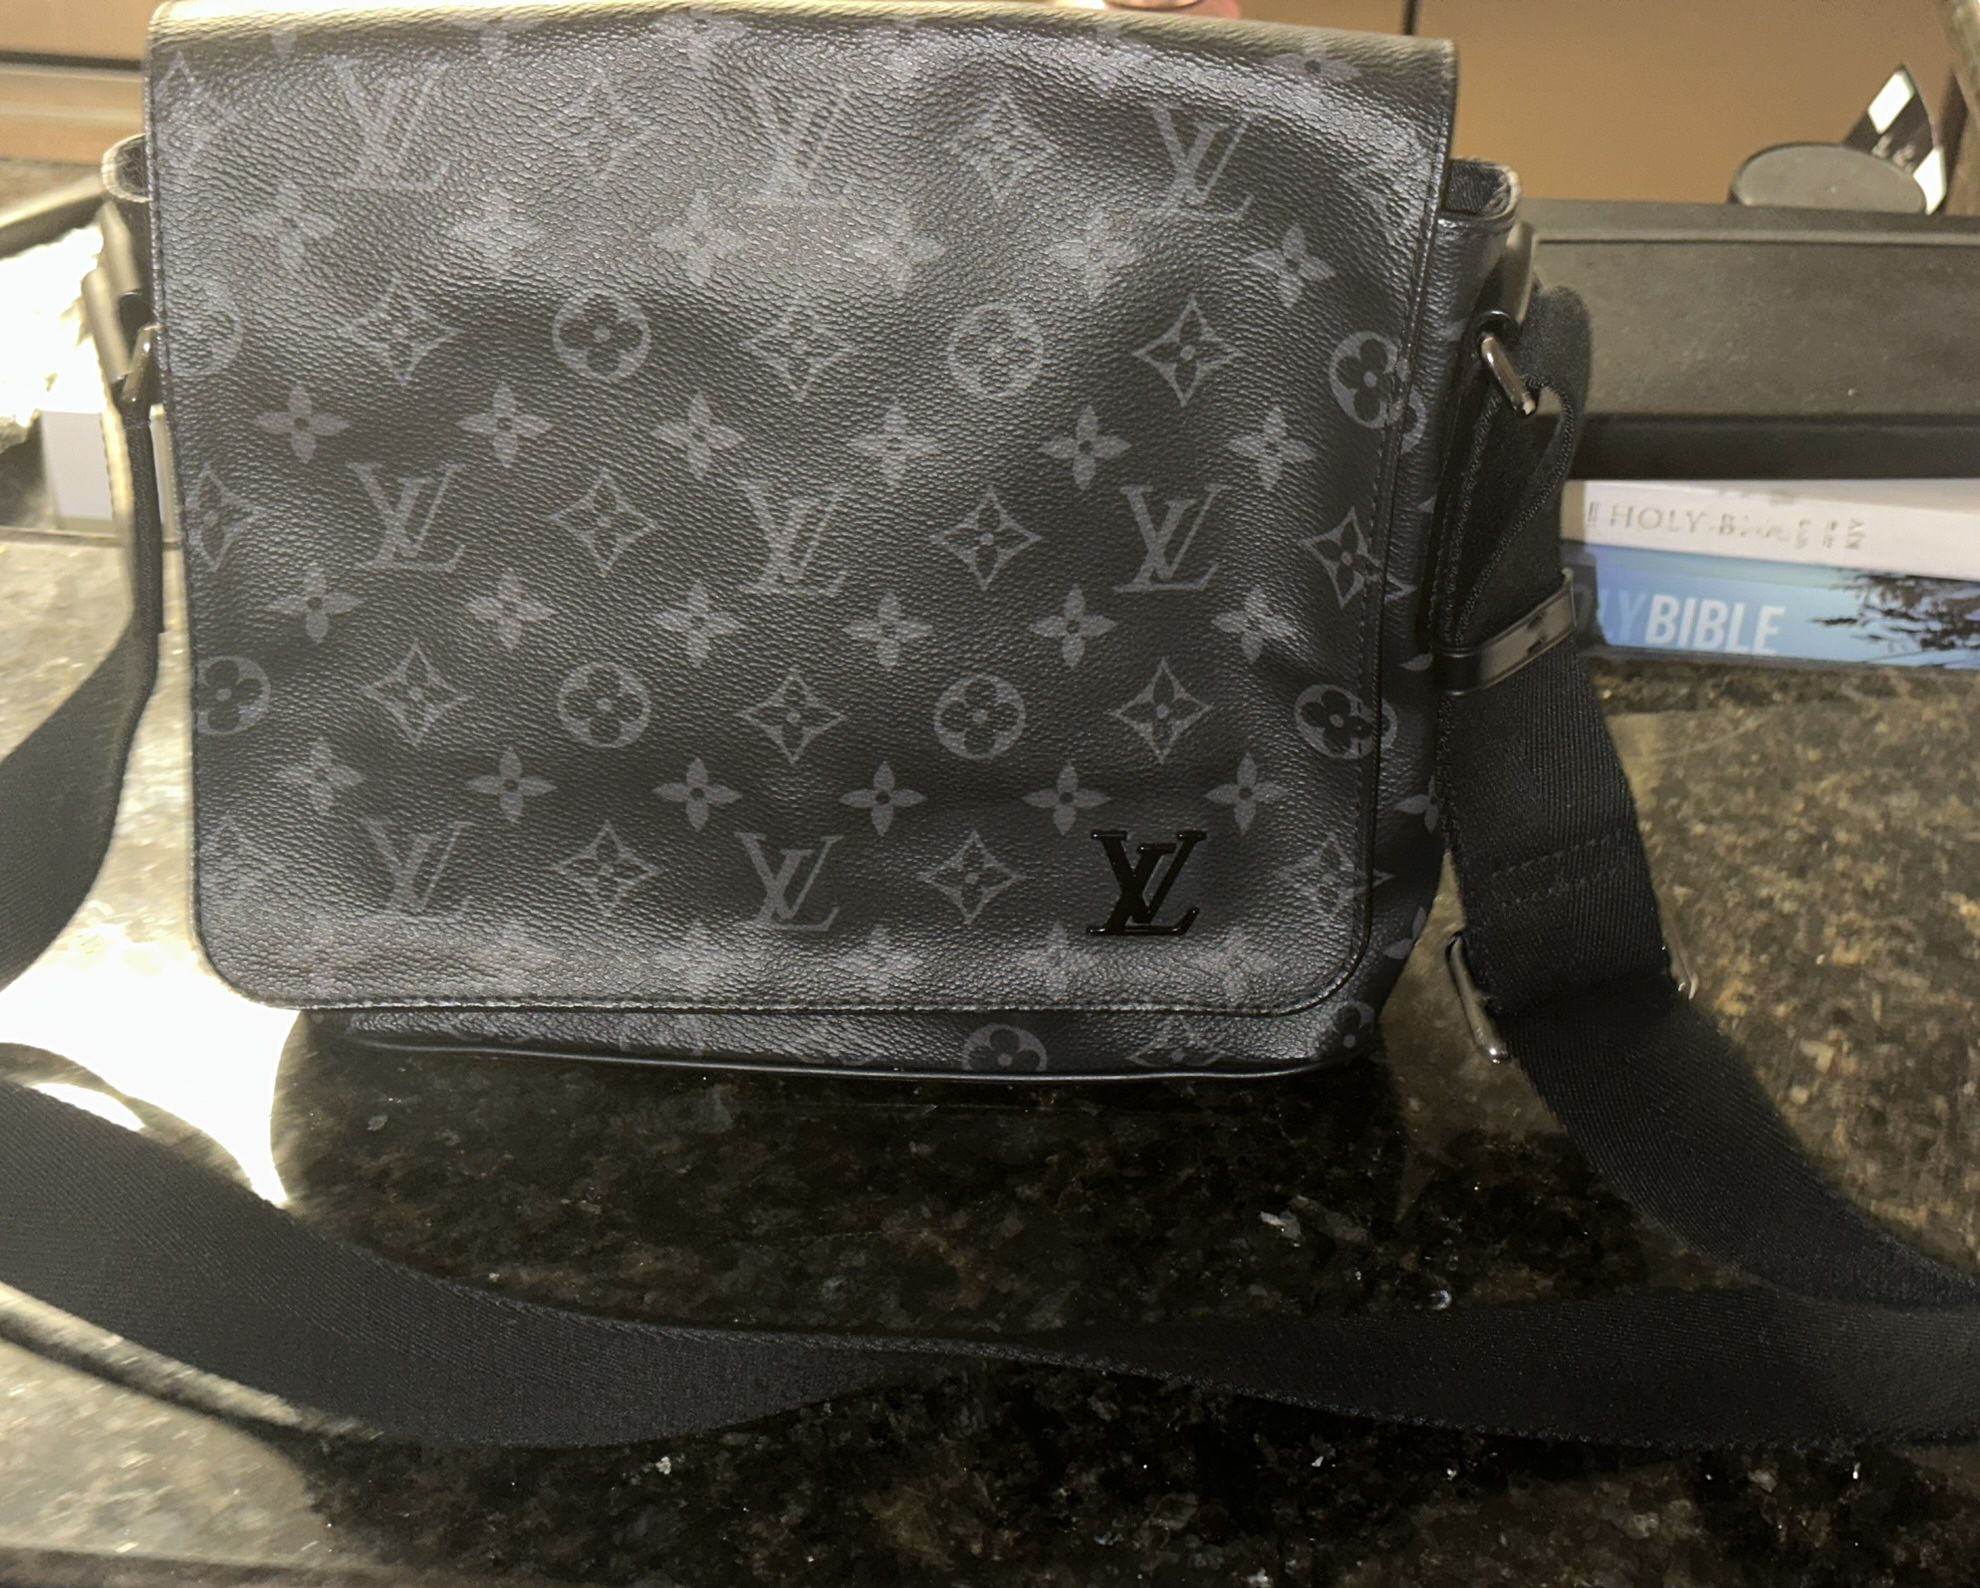 Louis Vuitton mongram canvas black gray leather brand new cosmetics  messenger bag for Sale in Providence, RI - OfferUp